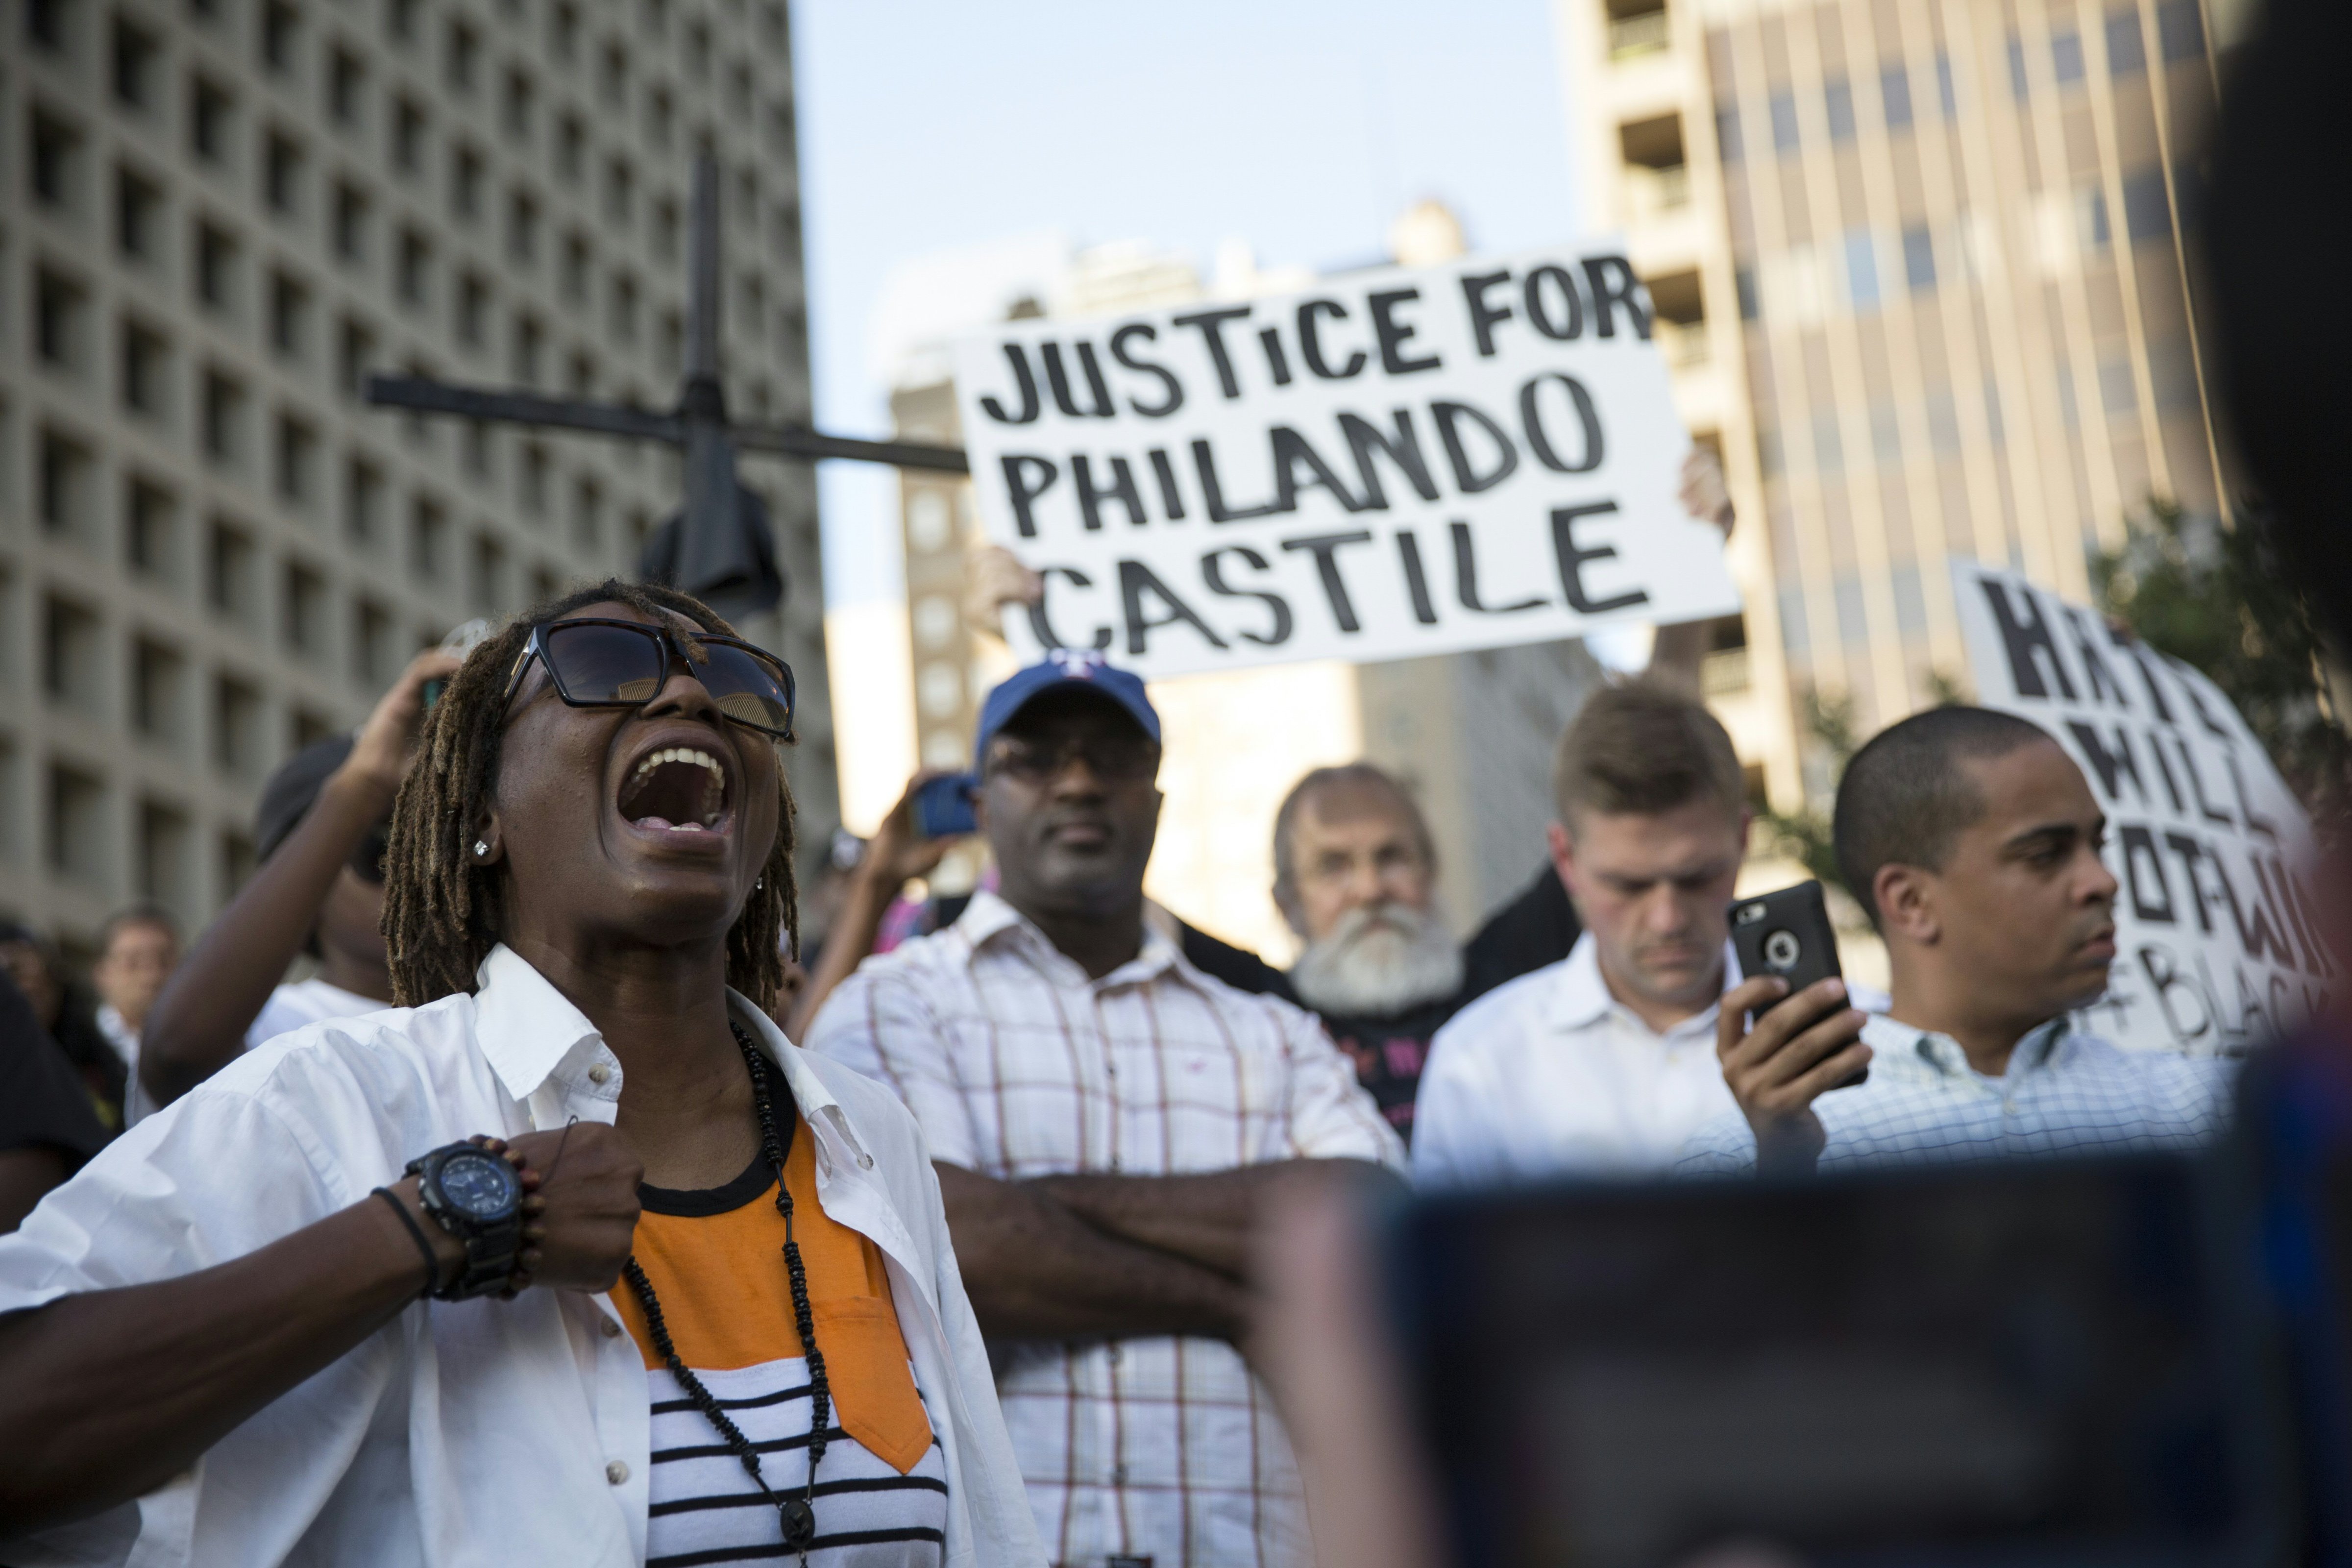 On July 7, 2016, people in Dallas protested the deaths of Alton Sterling and Philando Castile. Hours later, a sniper would target and kill police officers guarding the peaceful protest. (LAURA BUCKMAN&mdash;AFP/Getty Images)